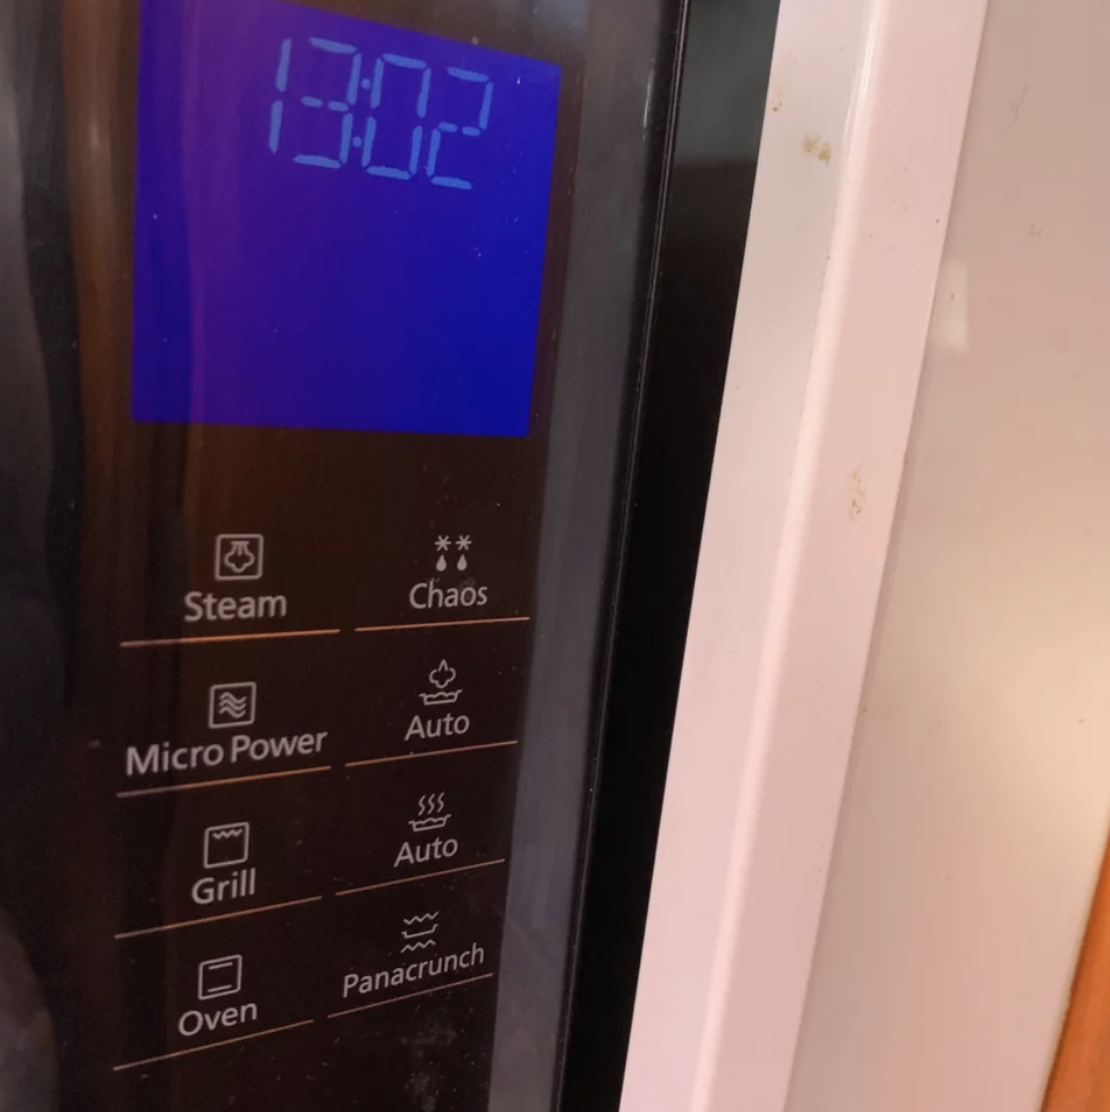 Chaos button on a microwave